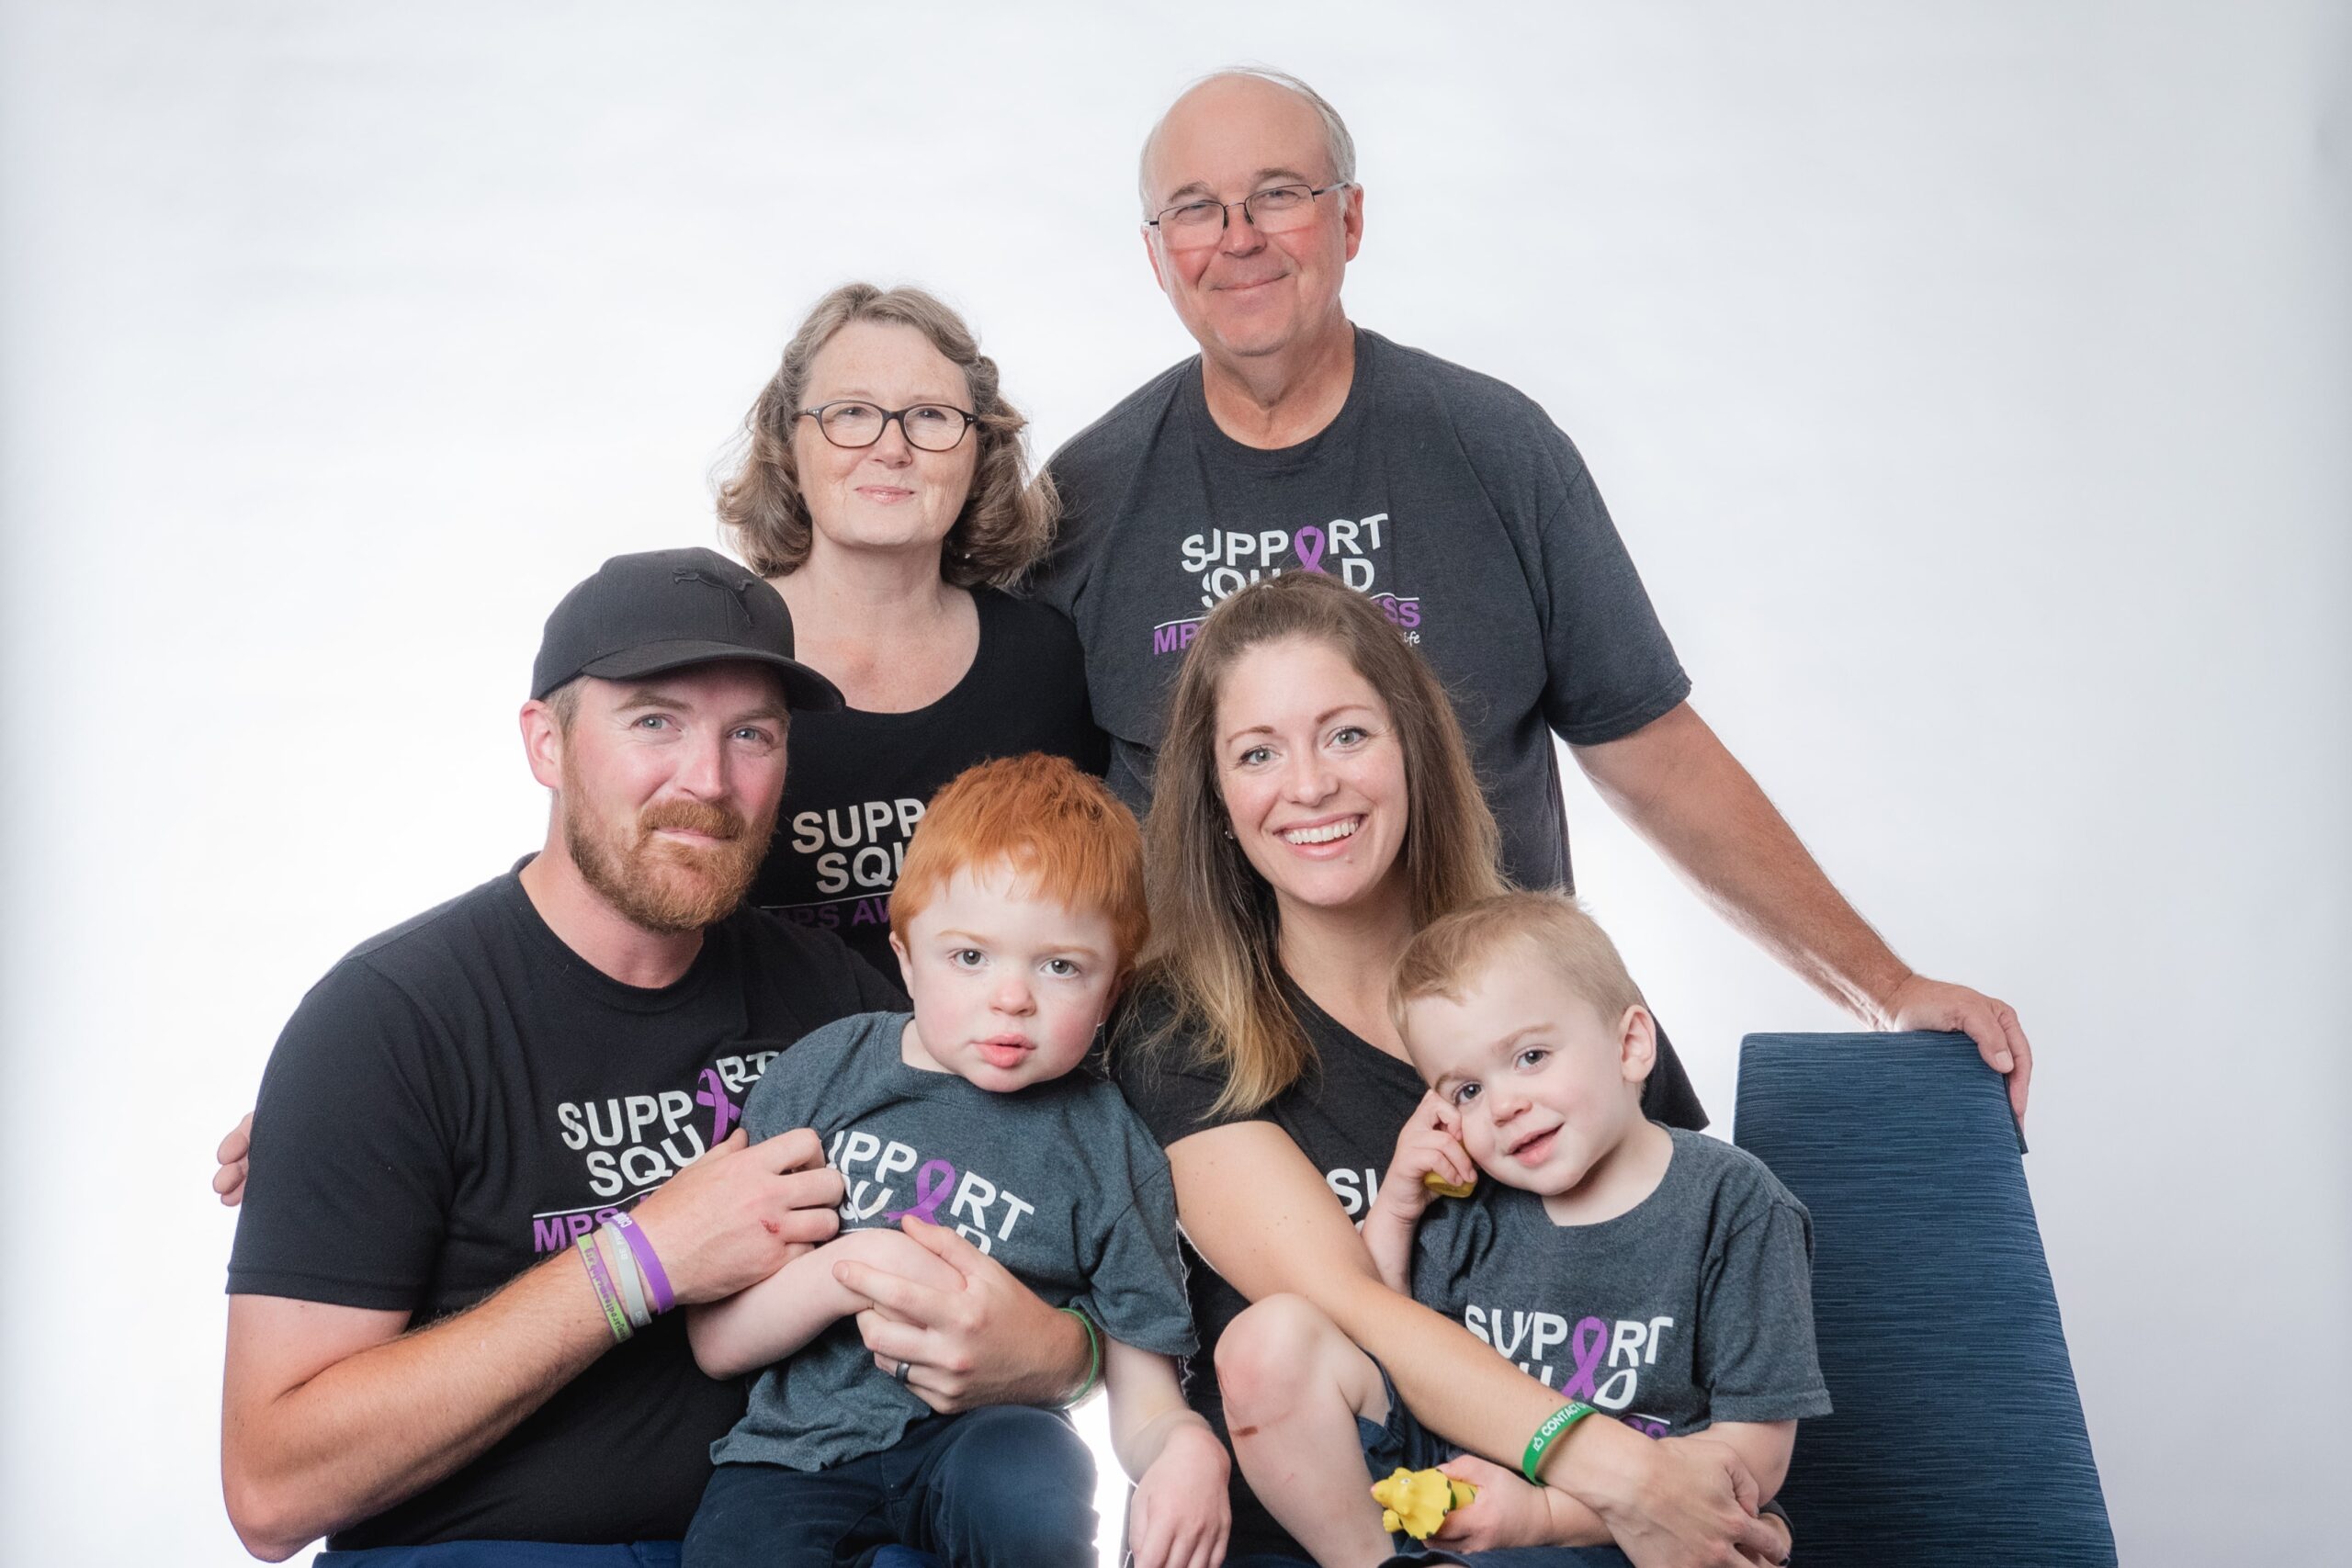 Family portrait with three generations in matching MPS awareness tshirts